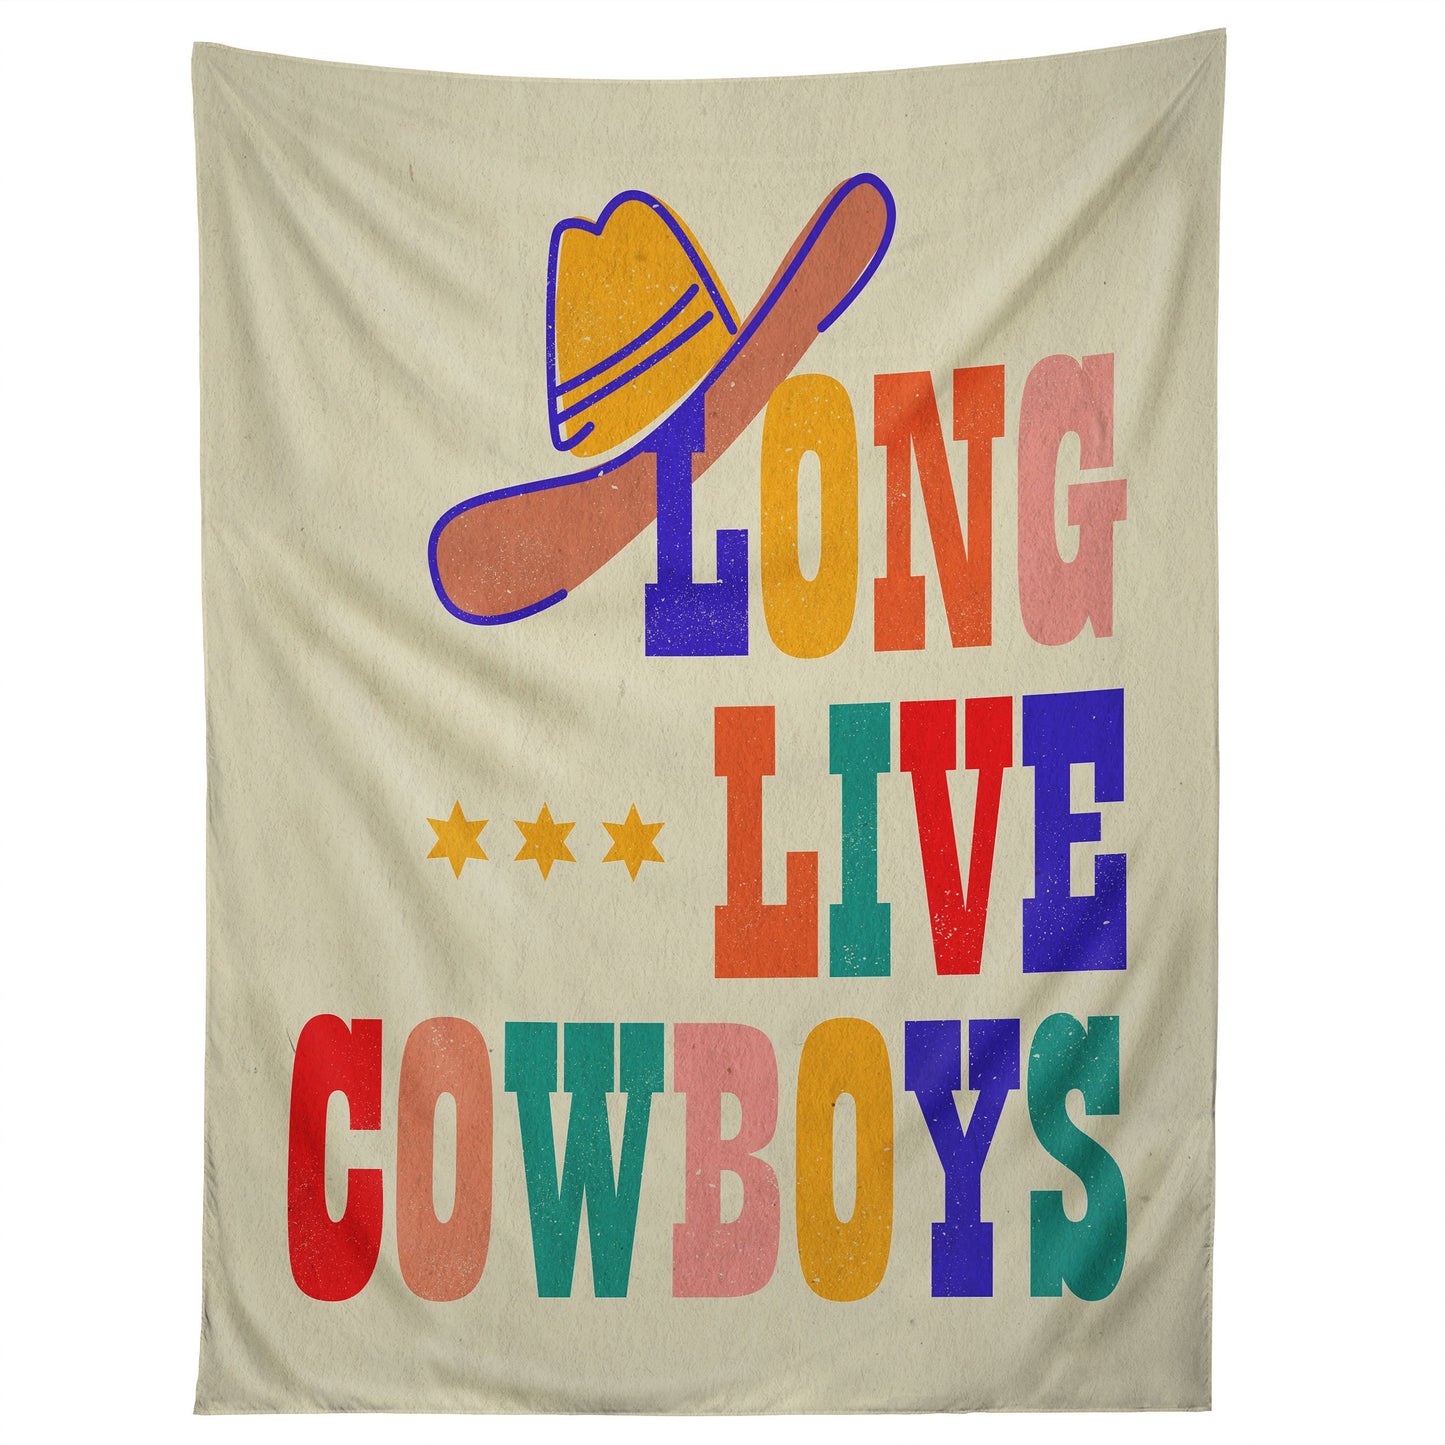 Long Live Cowboys Tapestry choice of sizes - cactus, decor, desert, picture, southwestern, wall, walldecor, western -  - Baha Ranch Western Wear